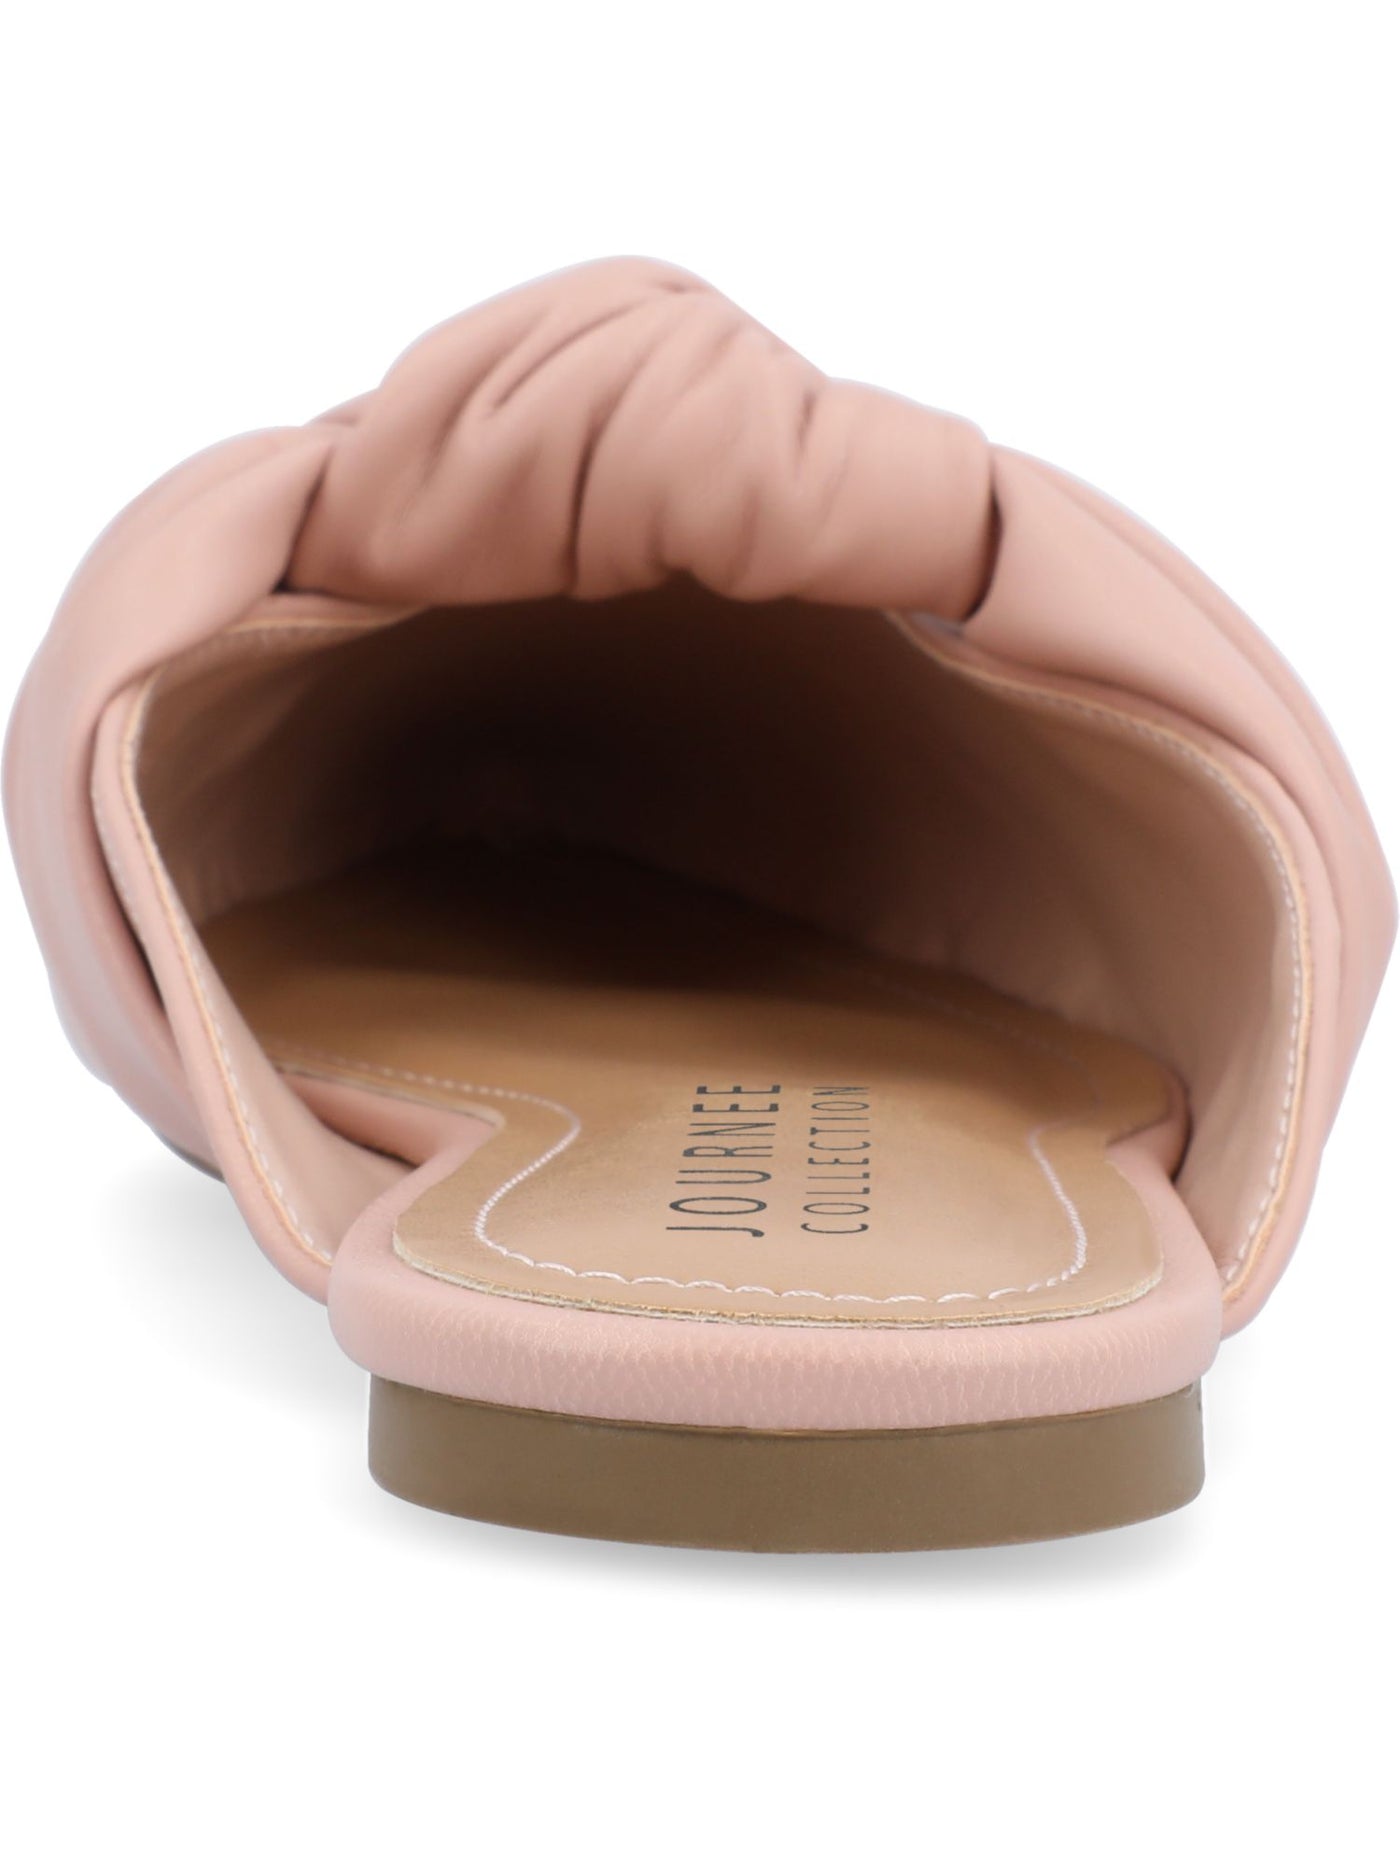 JOURNEE COLLECTION Womens Pink Knotted Padded Salinn Pointed Toe Slip On Mules 8